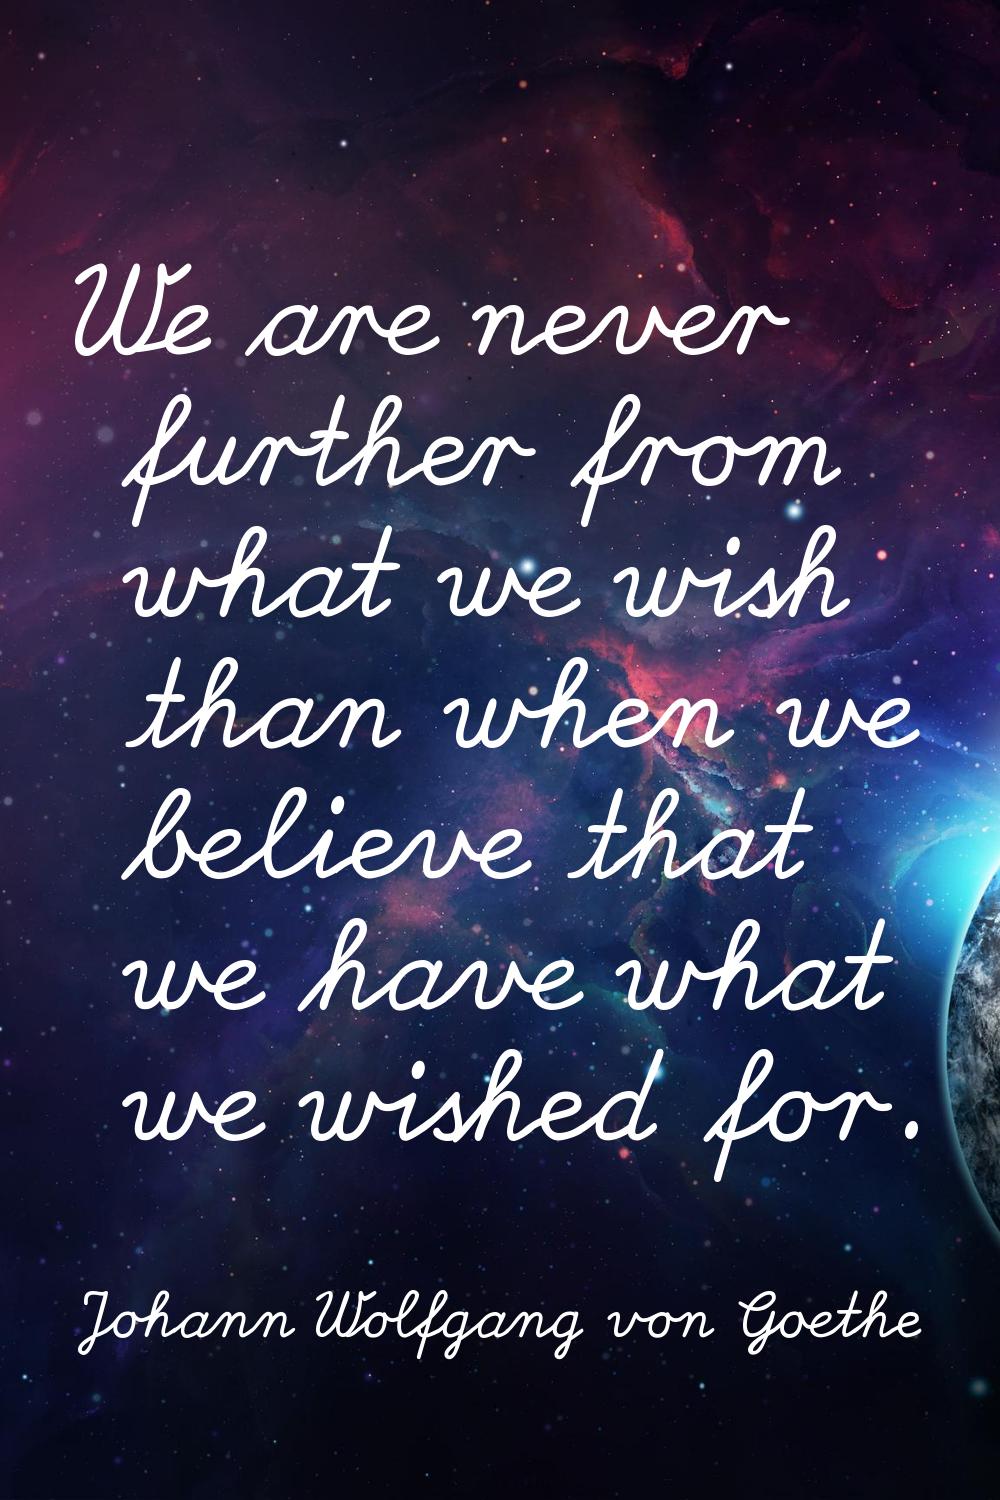 We are never further from what we wish than when we believe that we have what we wished for.